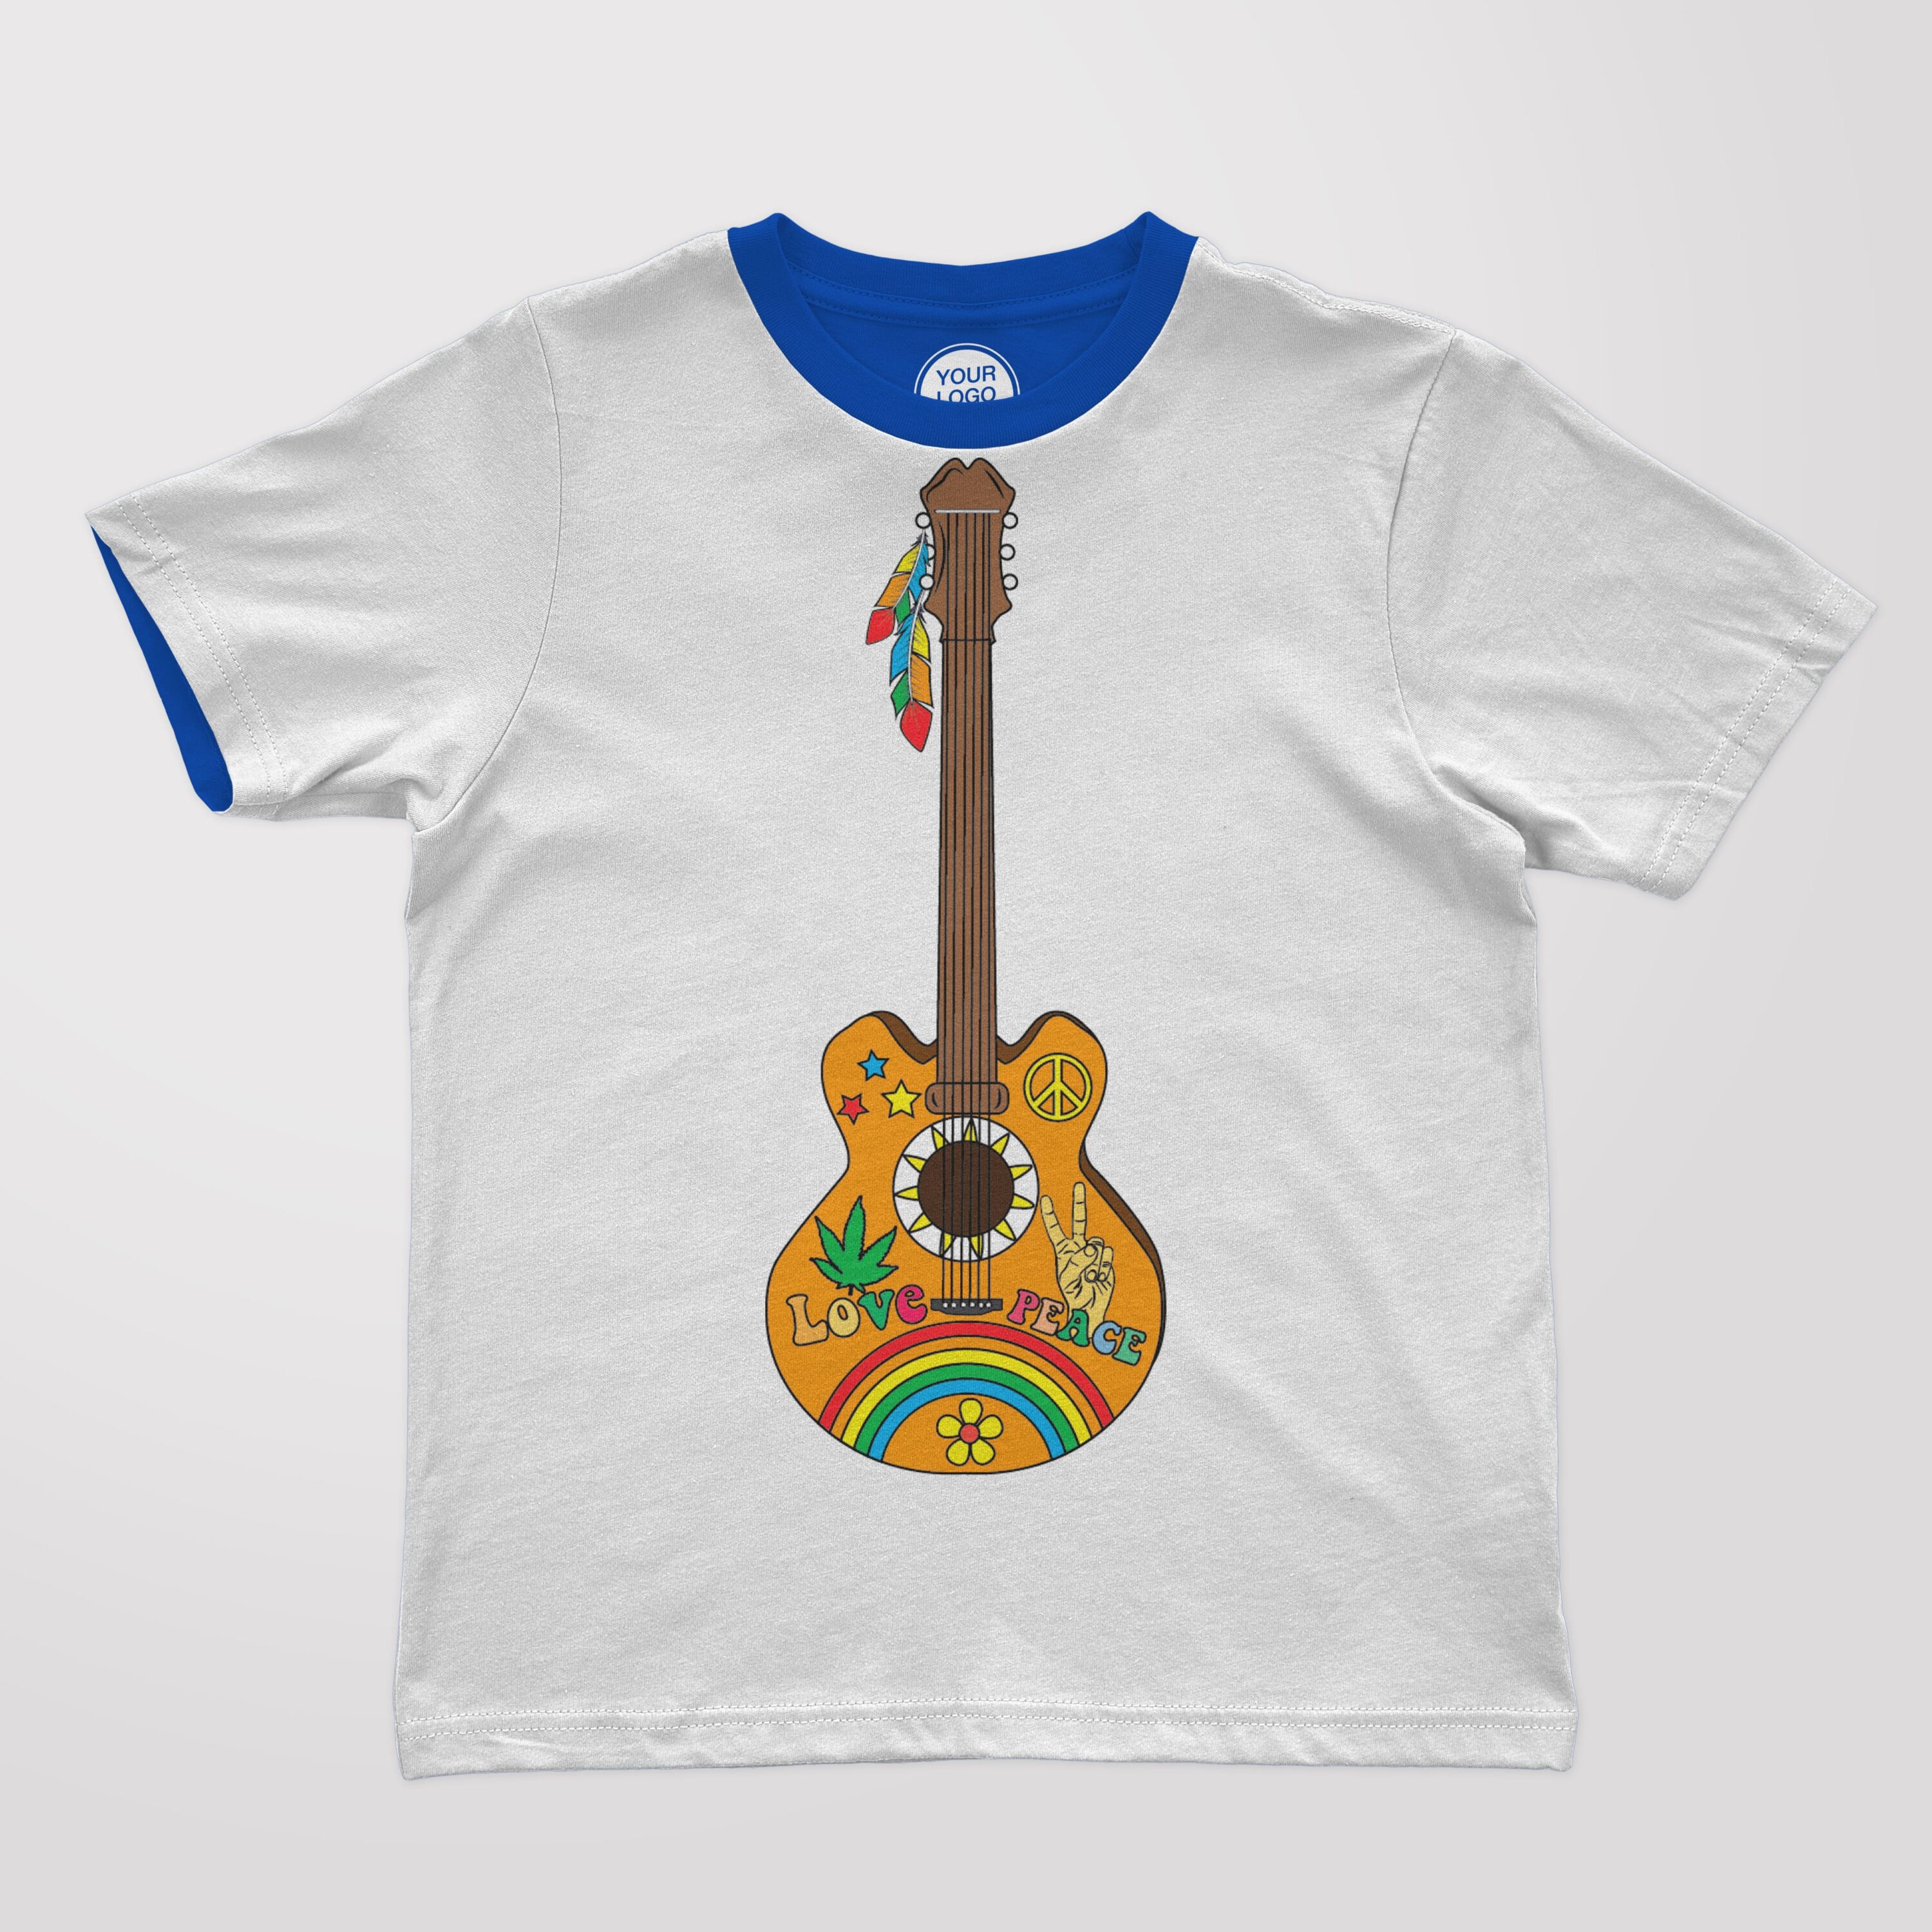 T-shirt design with printed themed hippie guitar.